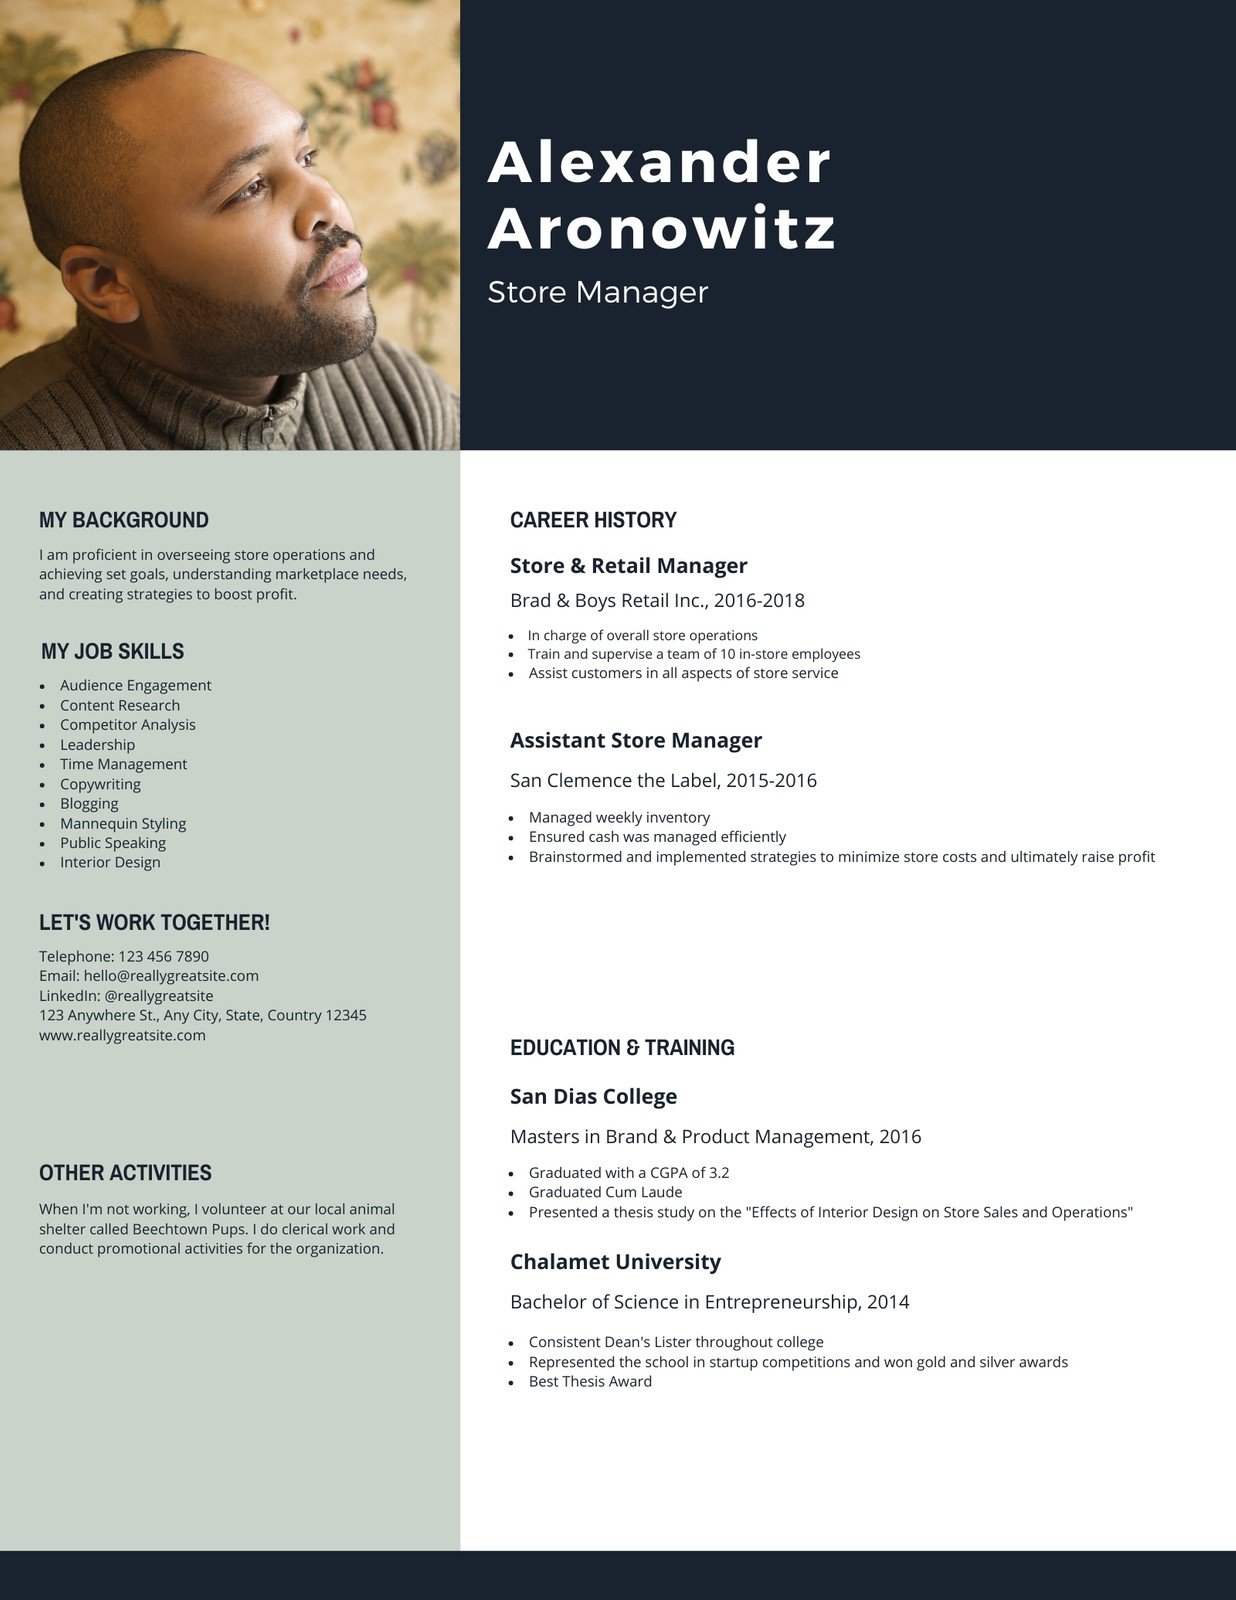 customize-29-academic-resumes-templates-online-canva